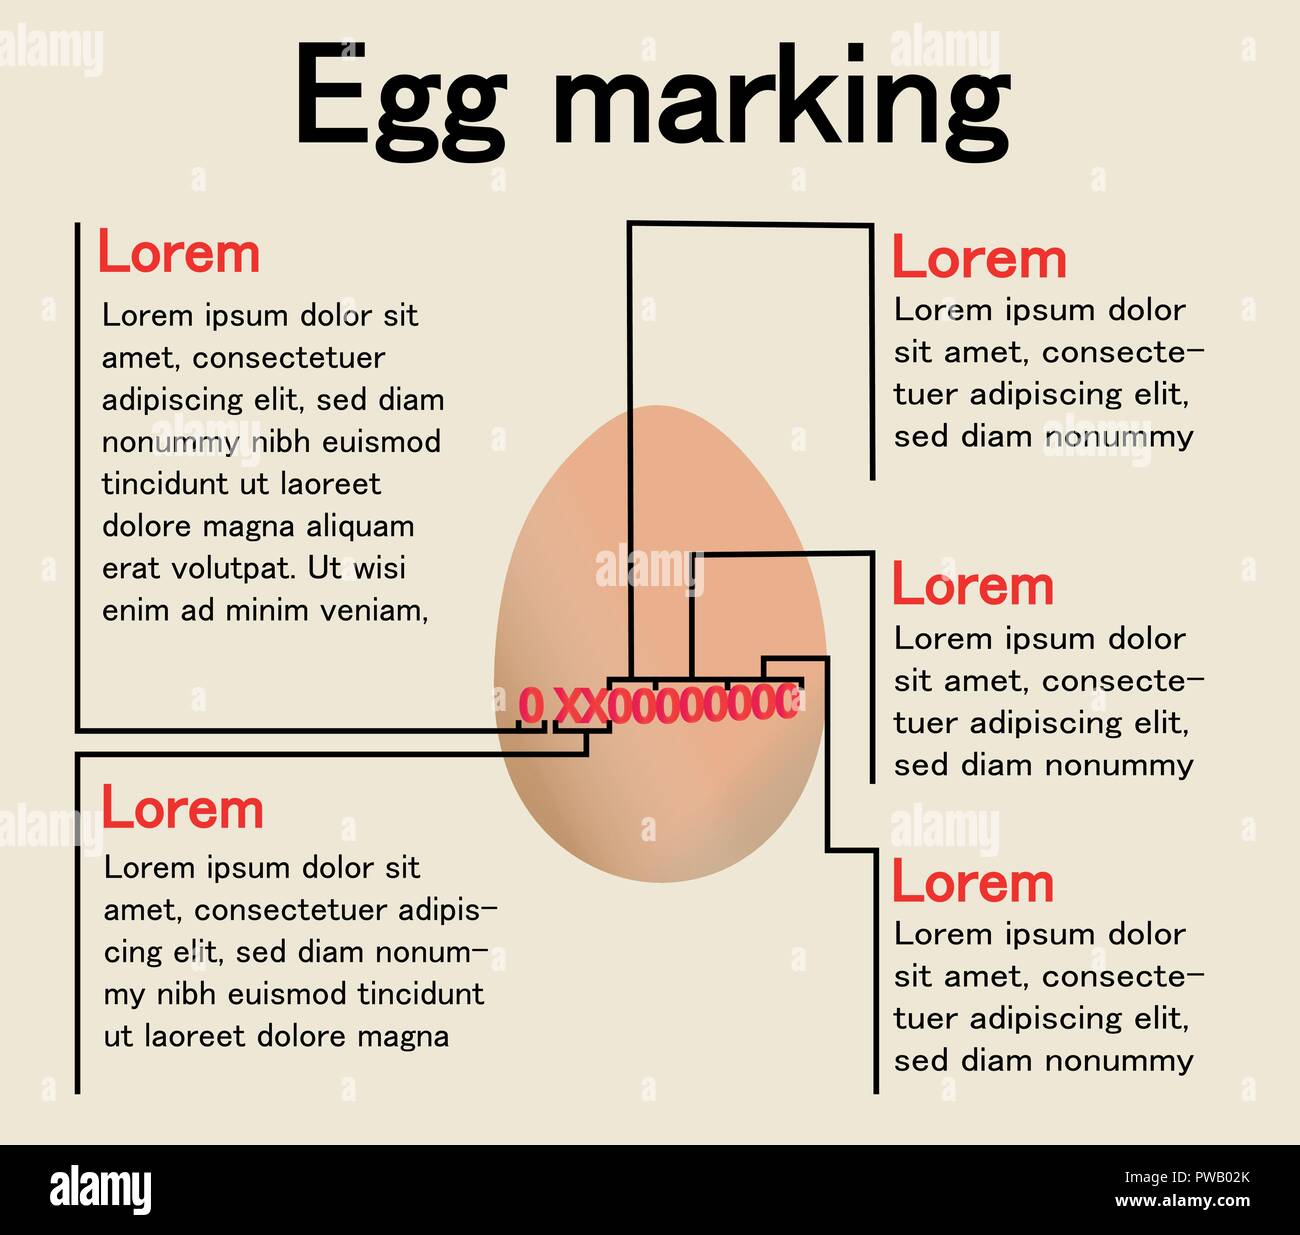 Egg Marking, presentation or infographic about the meaning of the